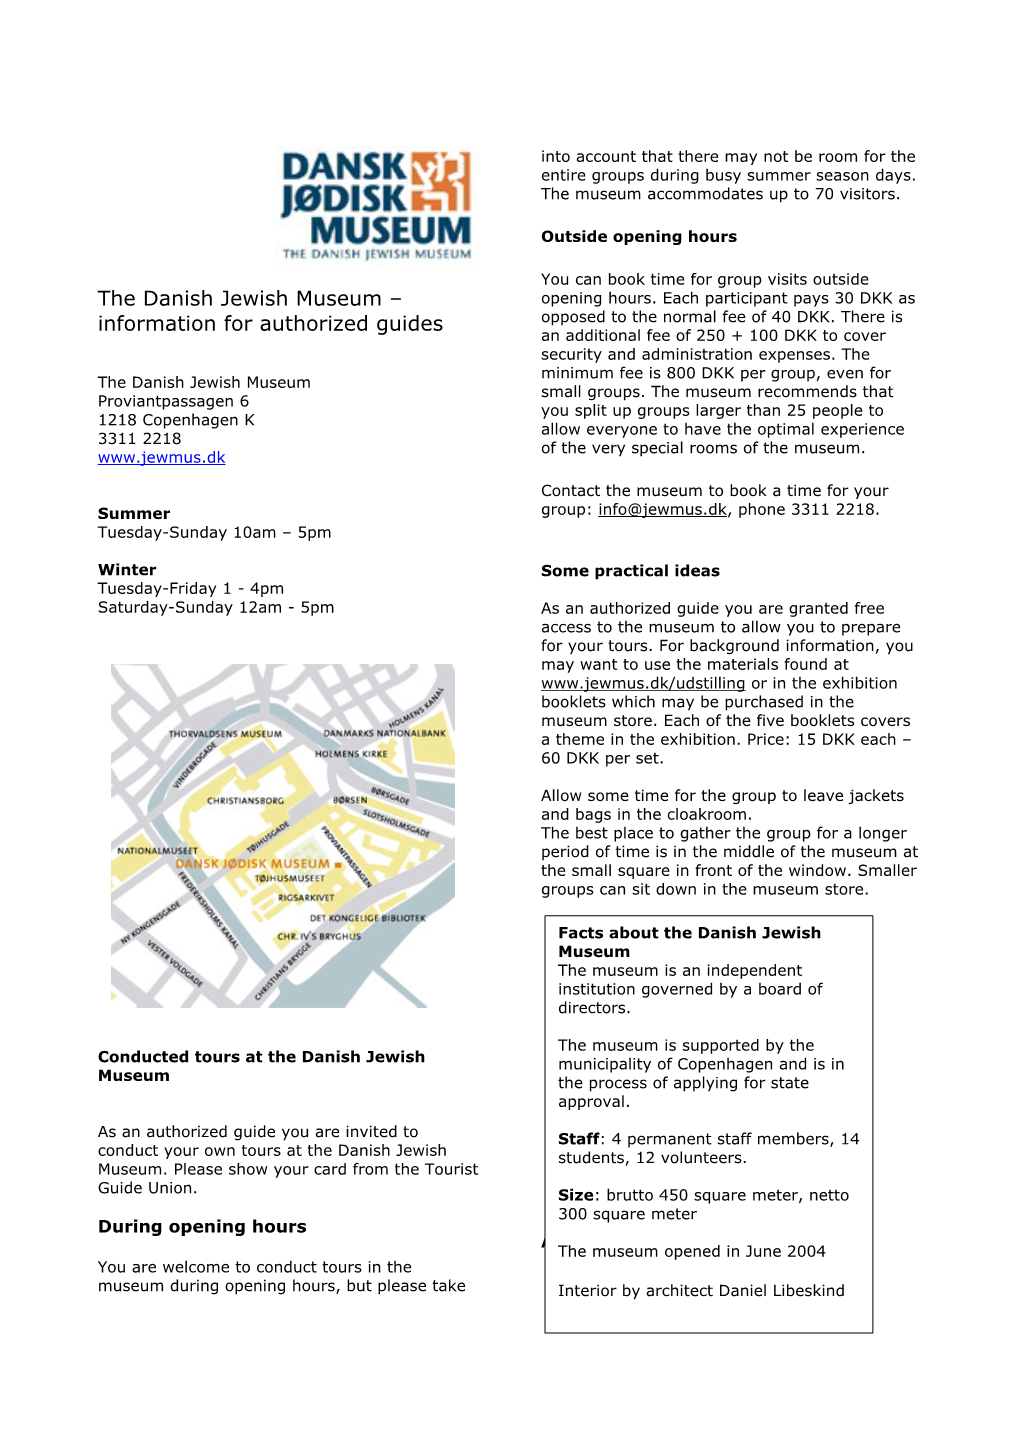 The Danish Jewish Museum – Information for Authorized Guides